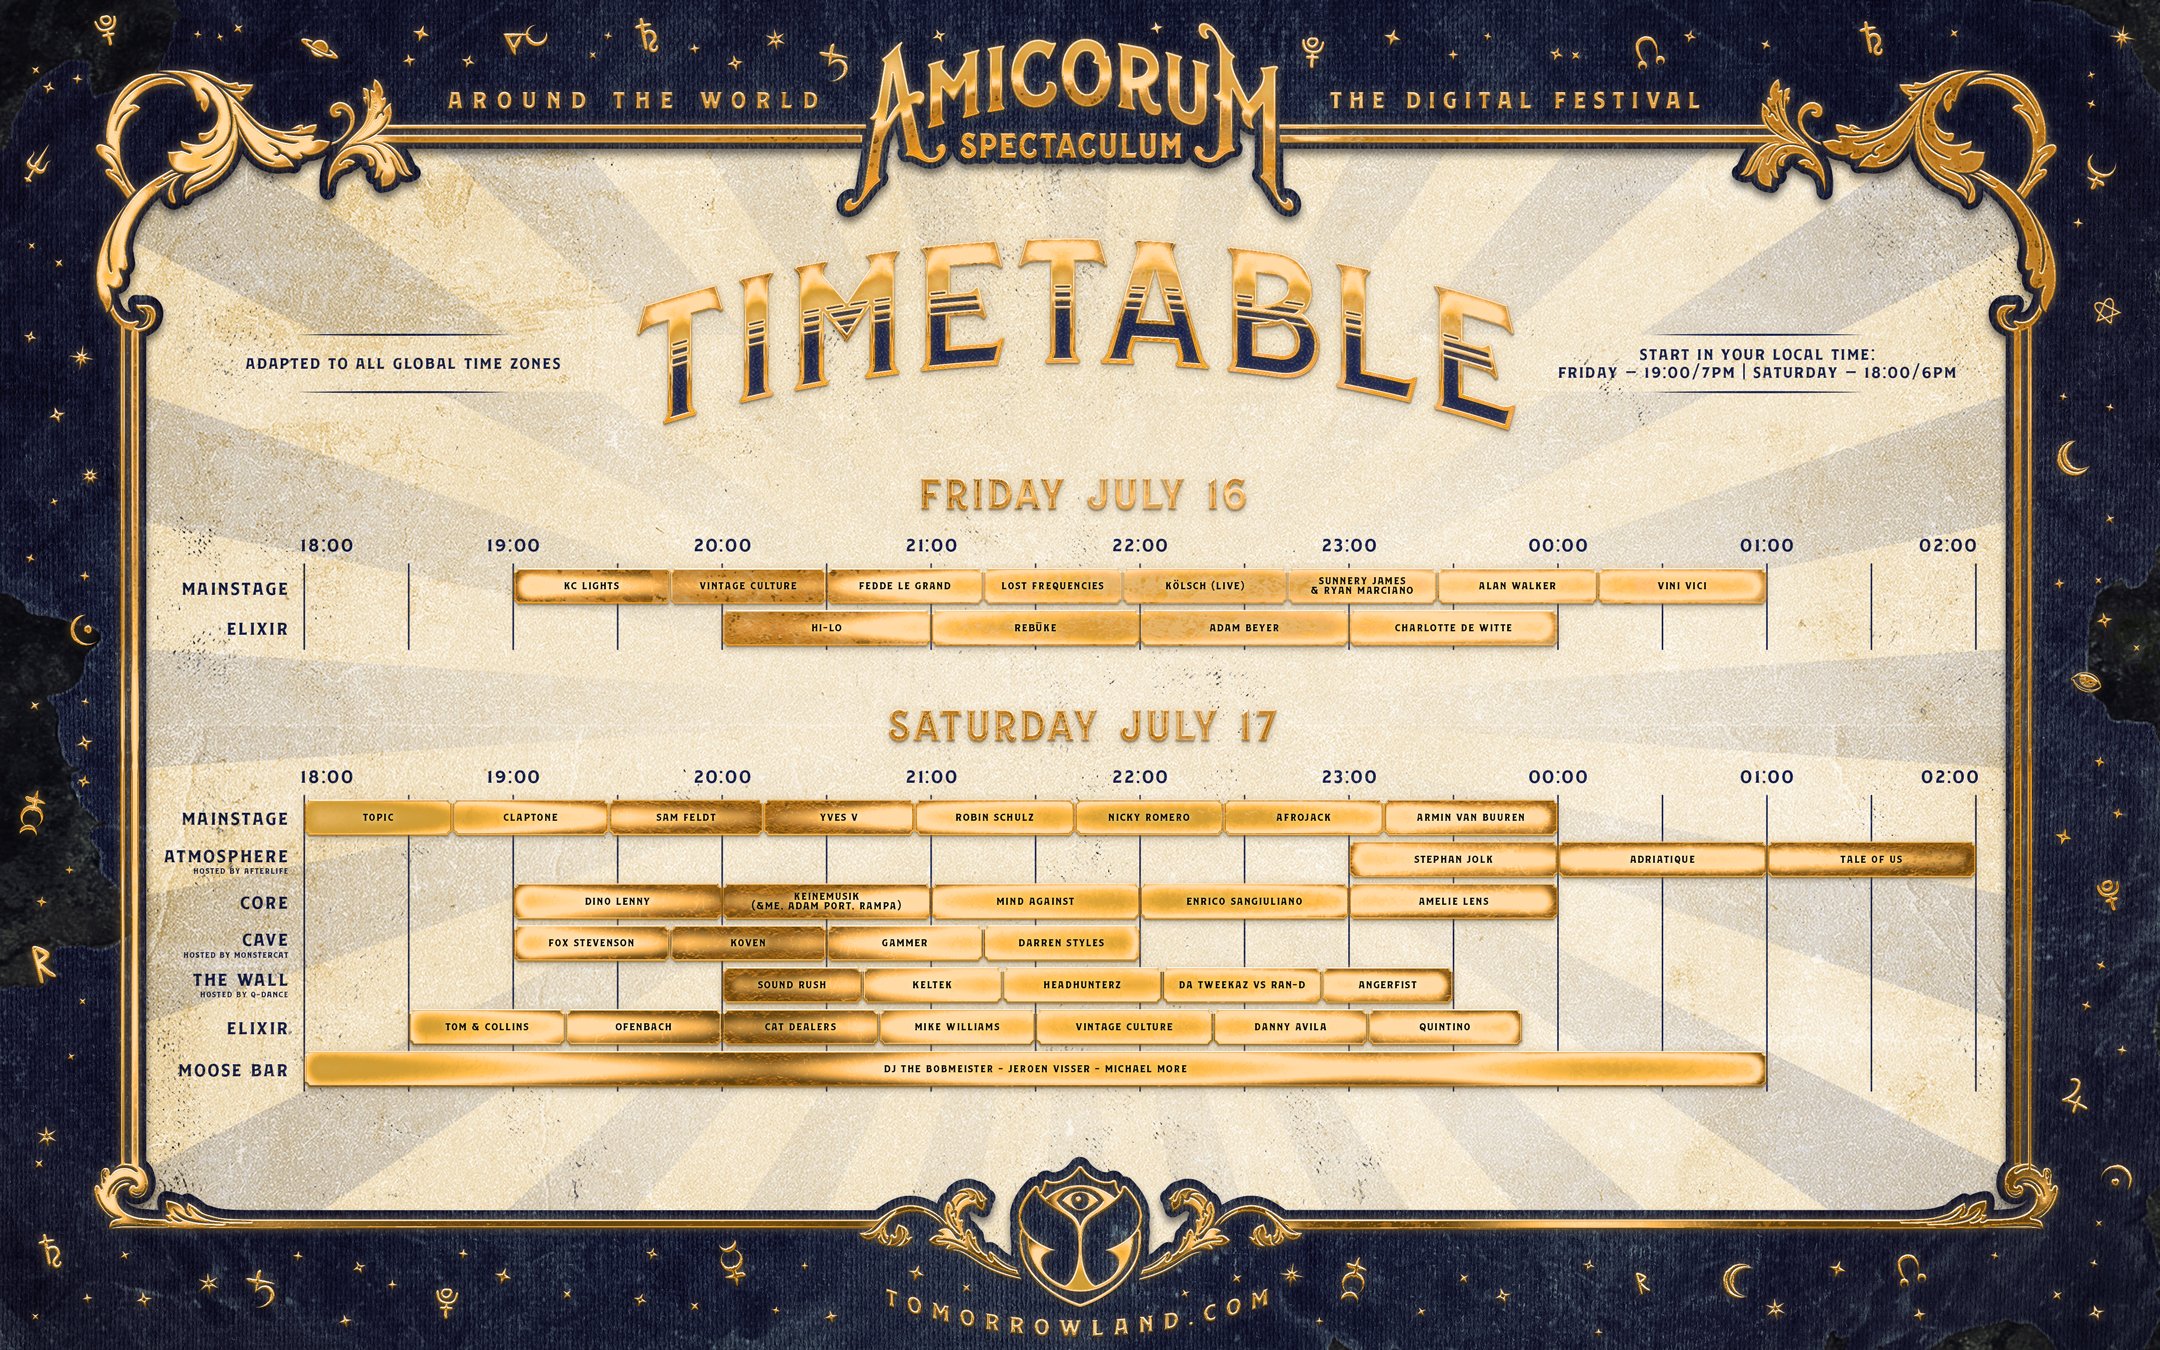 Tomorrowland on Twitter "Discover the full timetable for Tomorrowland